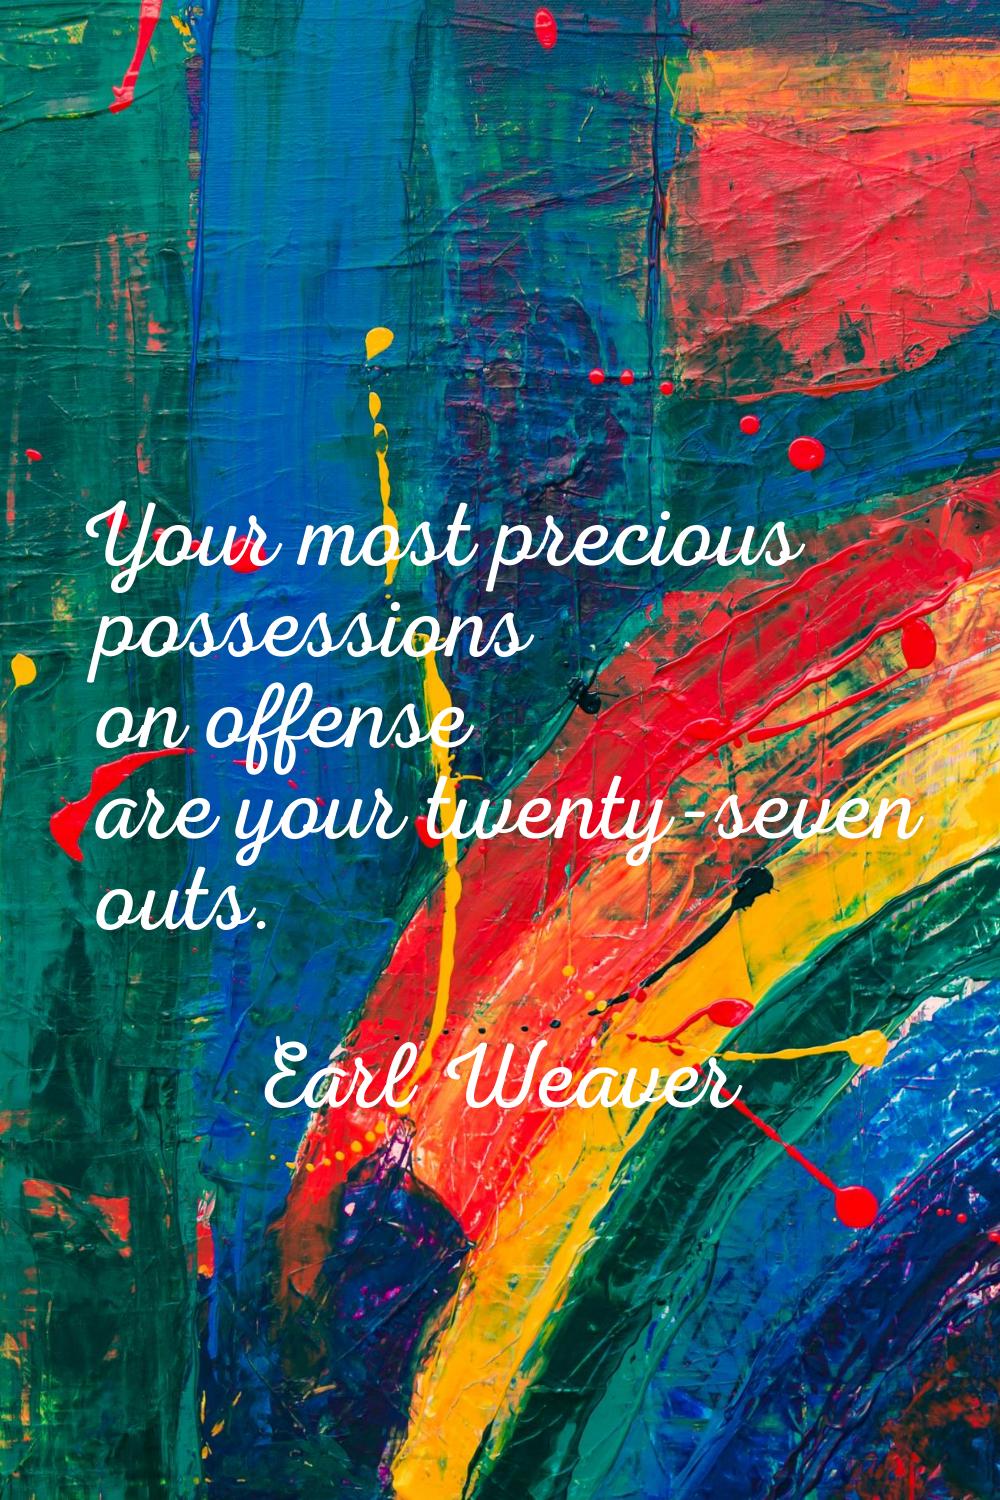 Your most precious possessions on offense are your twenty-seven outs.